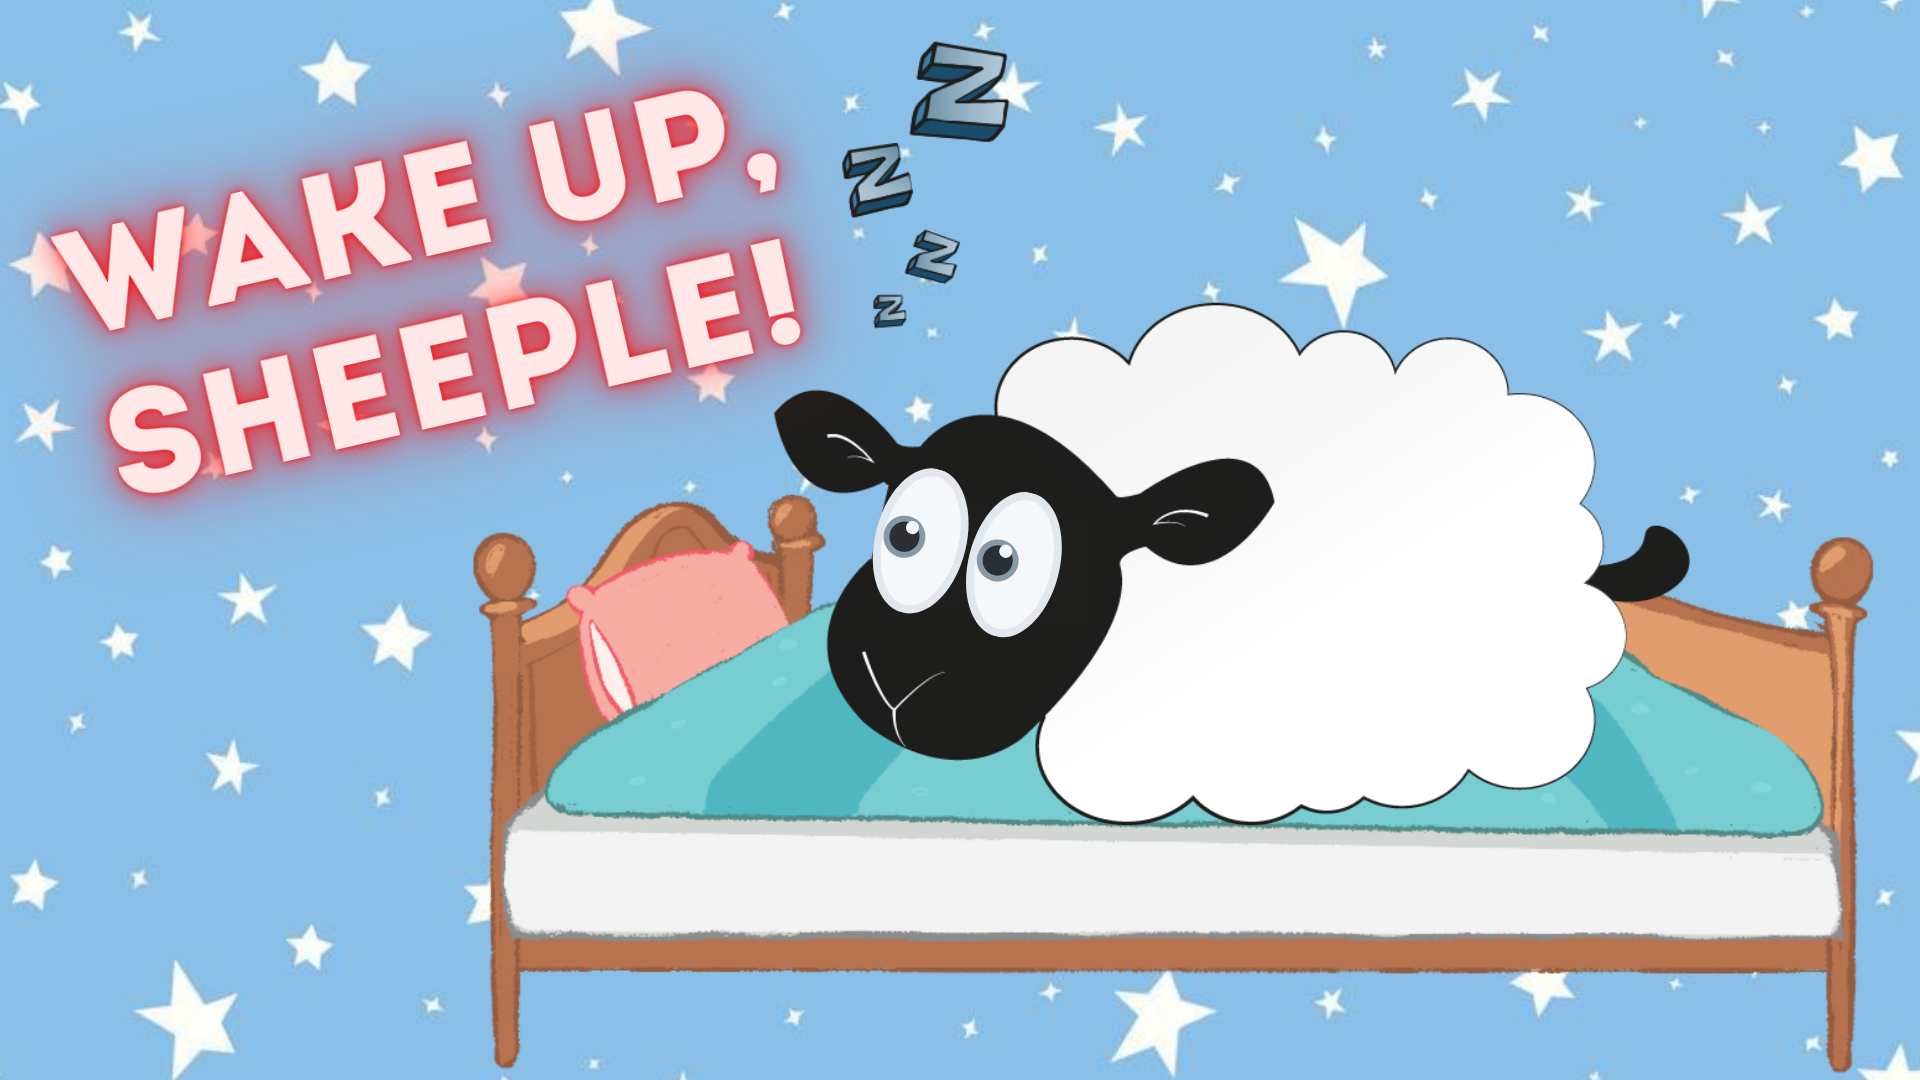 Sheep lying in bed with wake up, sheeple